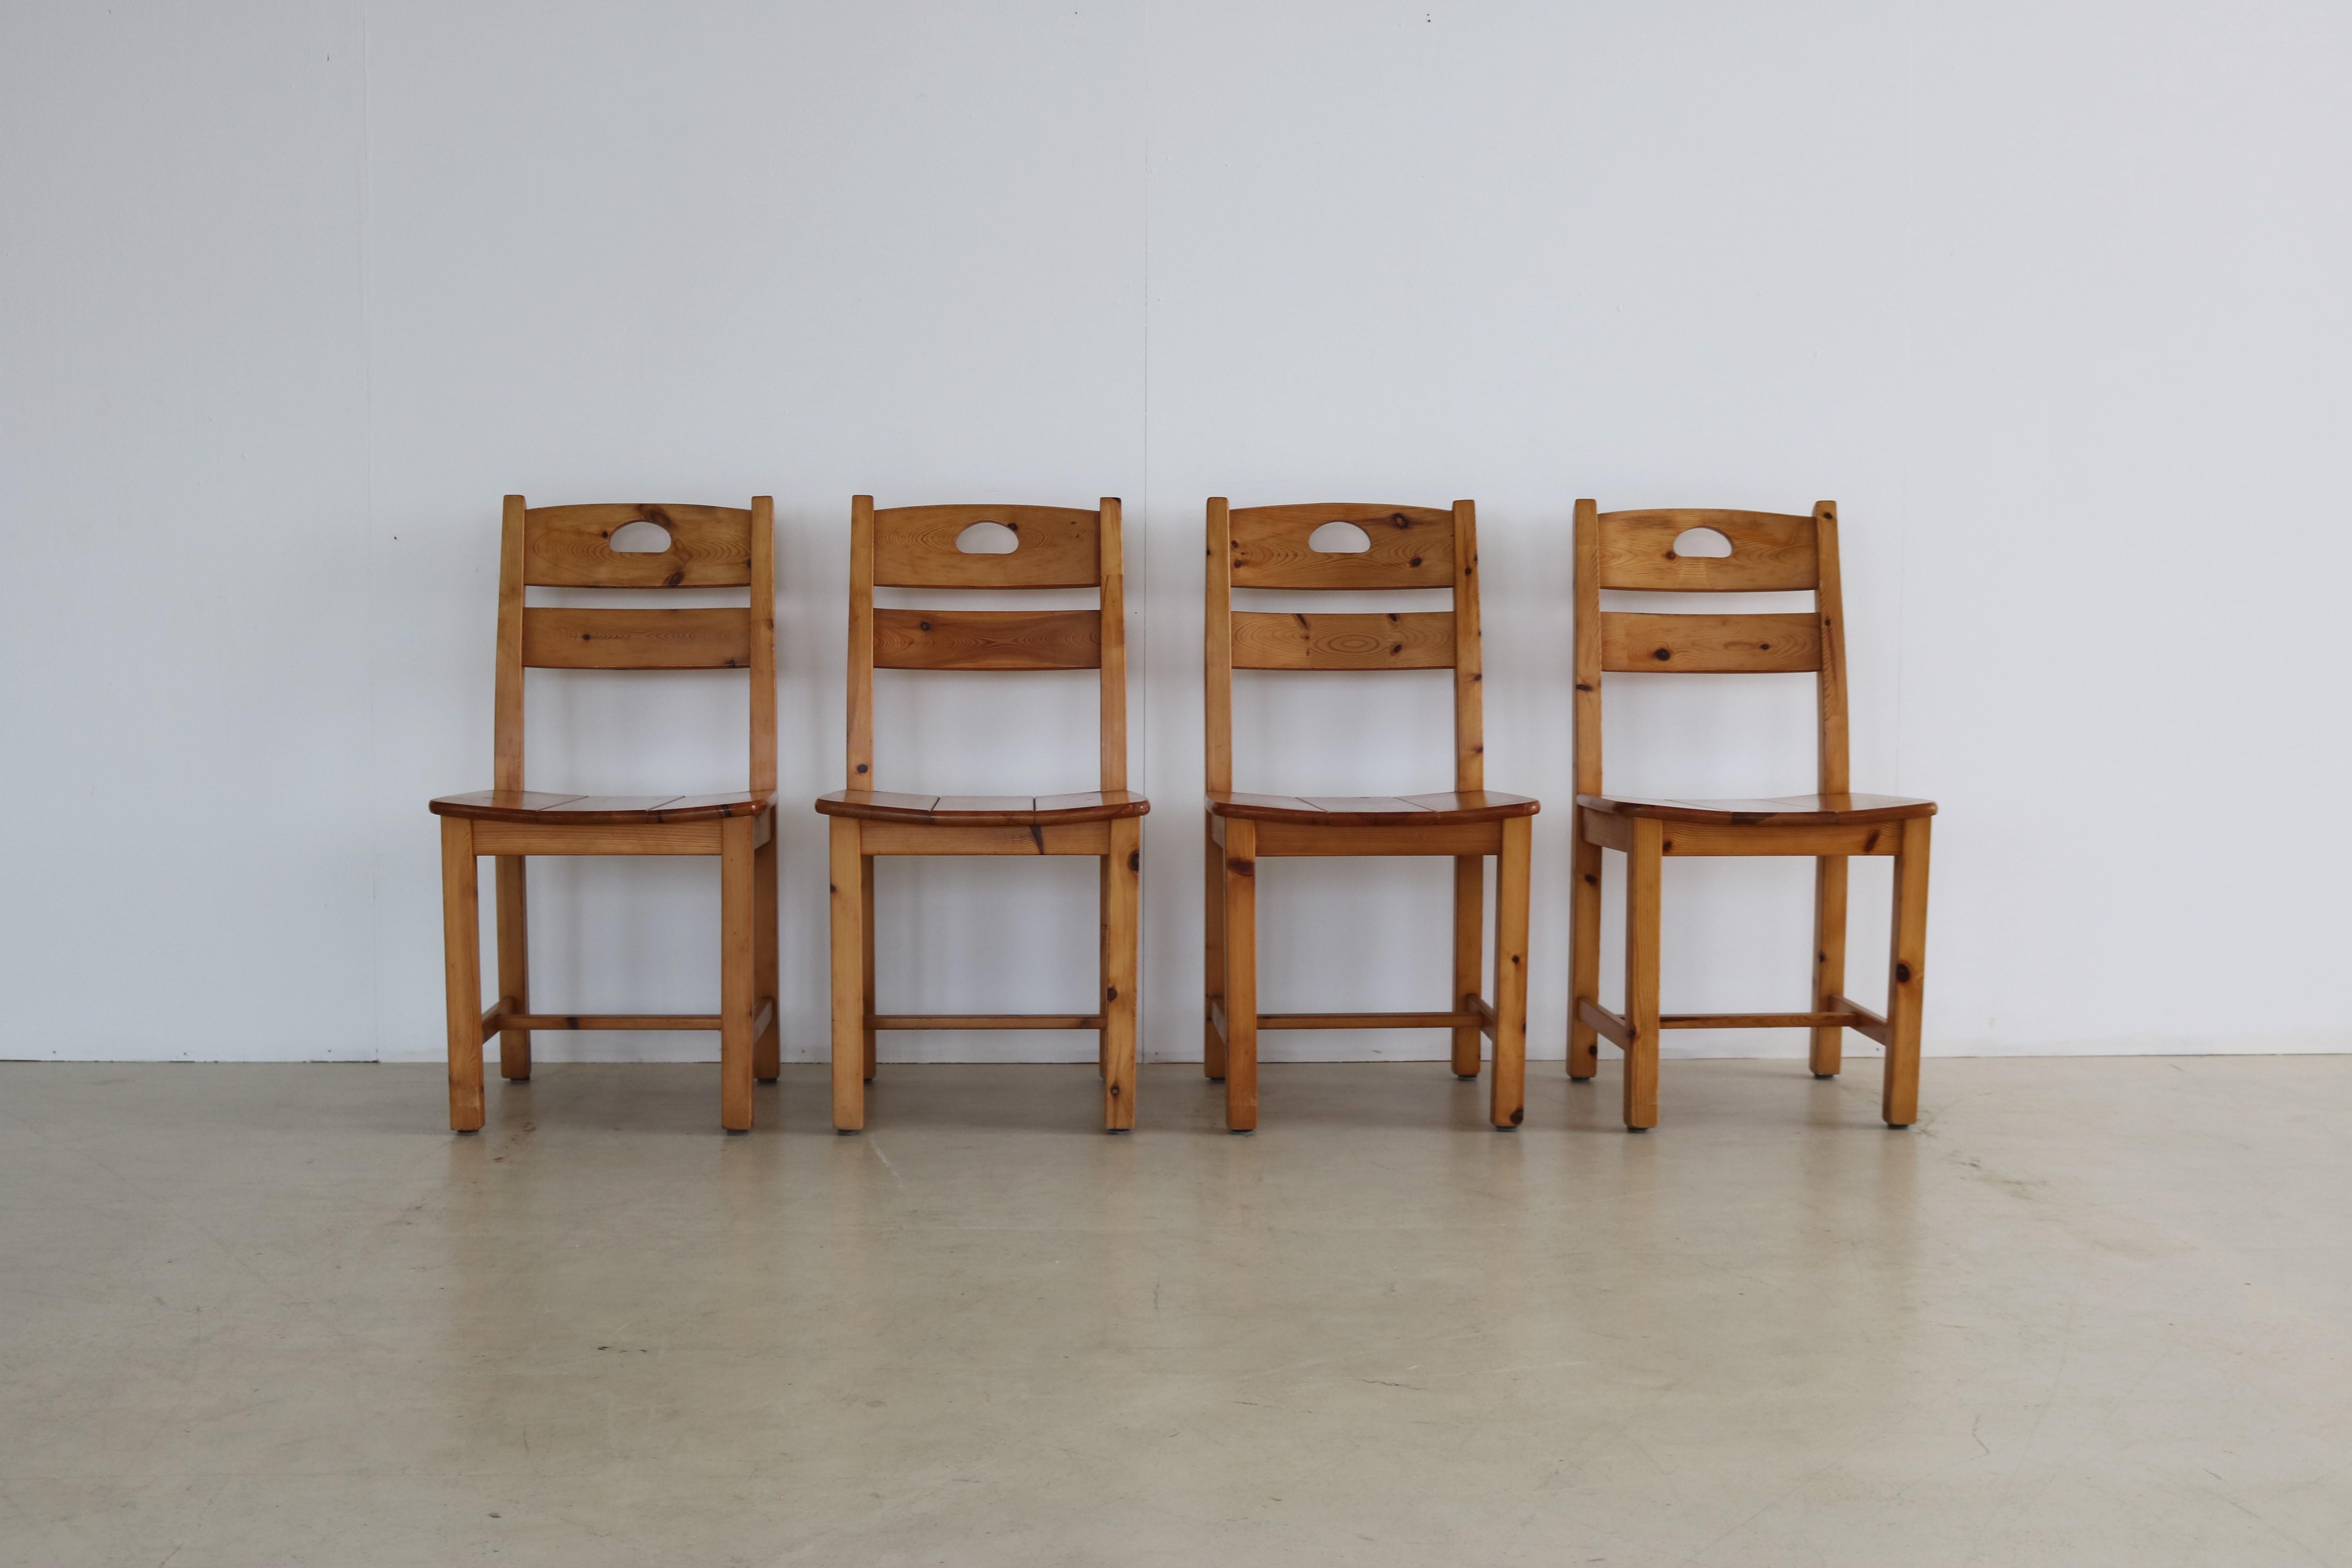 vintage dining room chairs  chairs  pine

period  70s
design  unknown  Sweden
condition  good  light signs of use
size  89 x 46 x 50 (hxwxd) seat height 46 cm;

details  pine; set of 4;

article number  2318